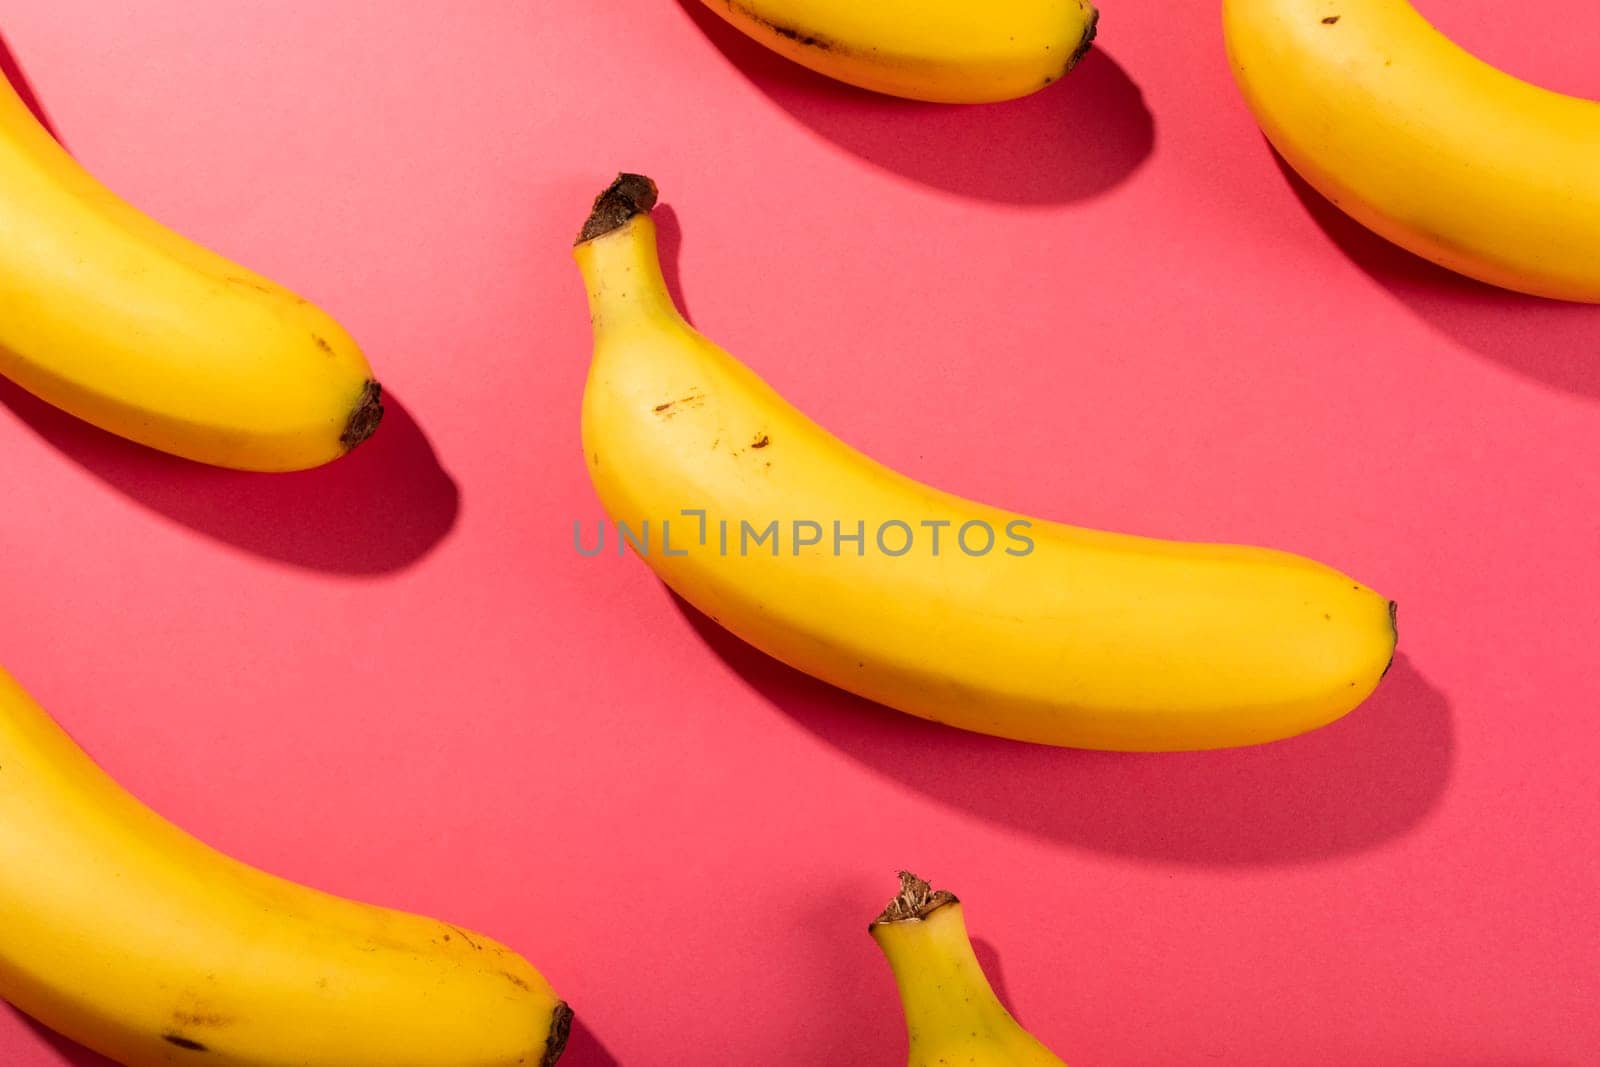 Overhead view of fresh bananas on pink background. unaltered, organic food and healthy eating concept.